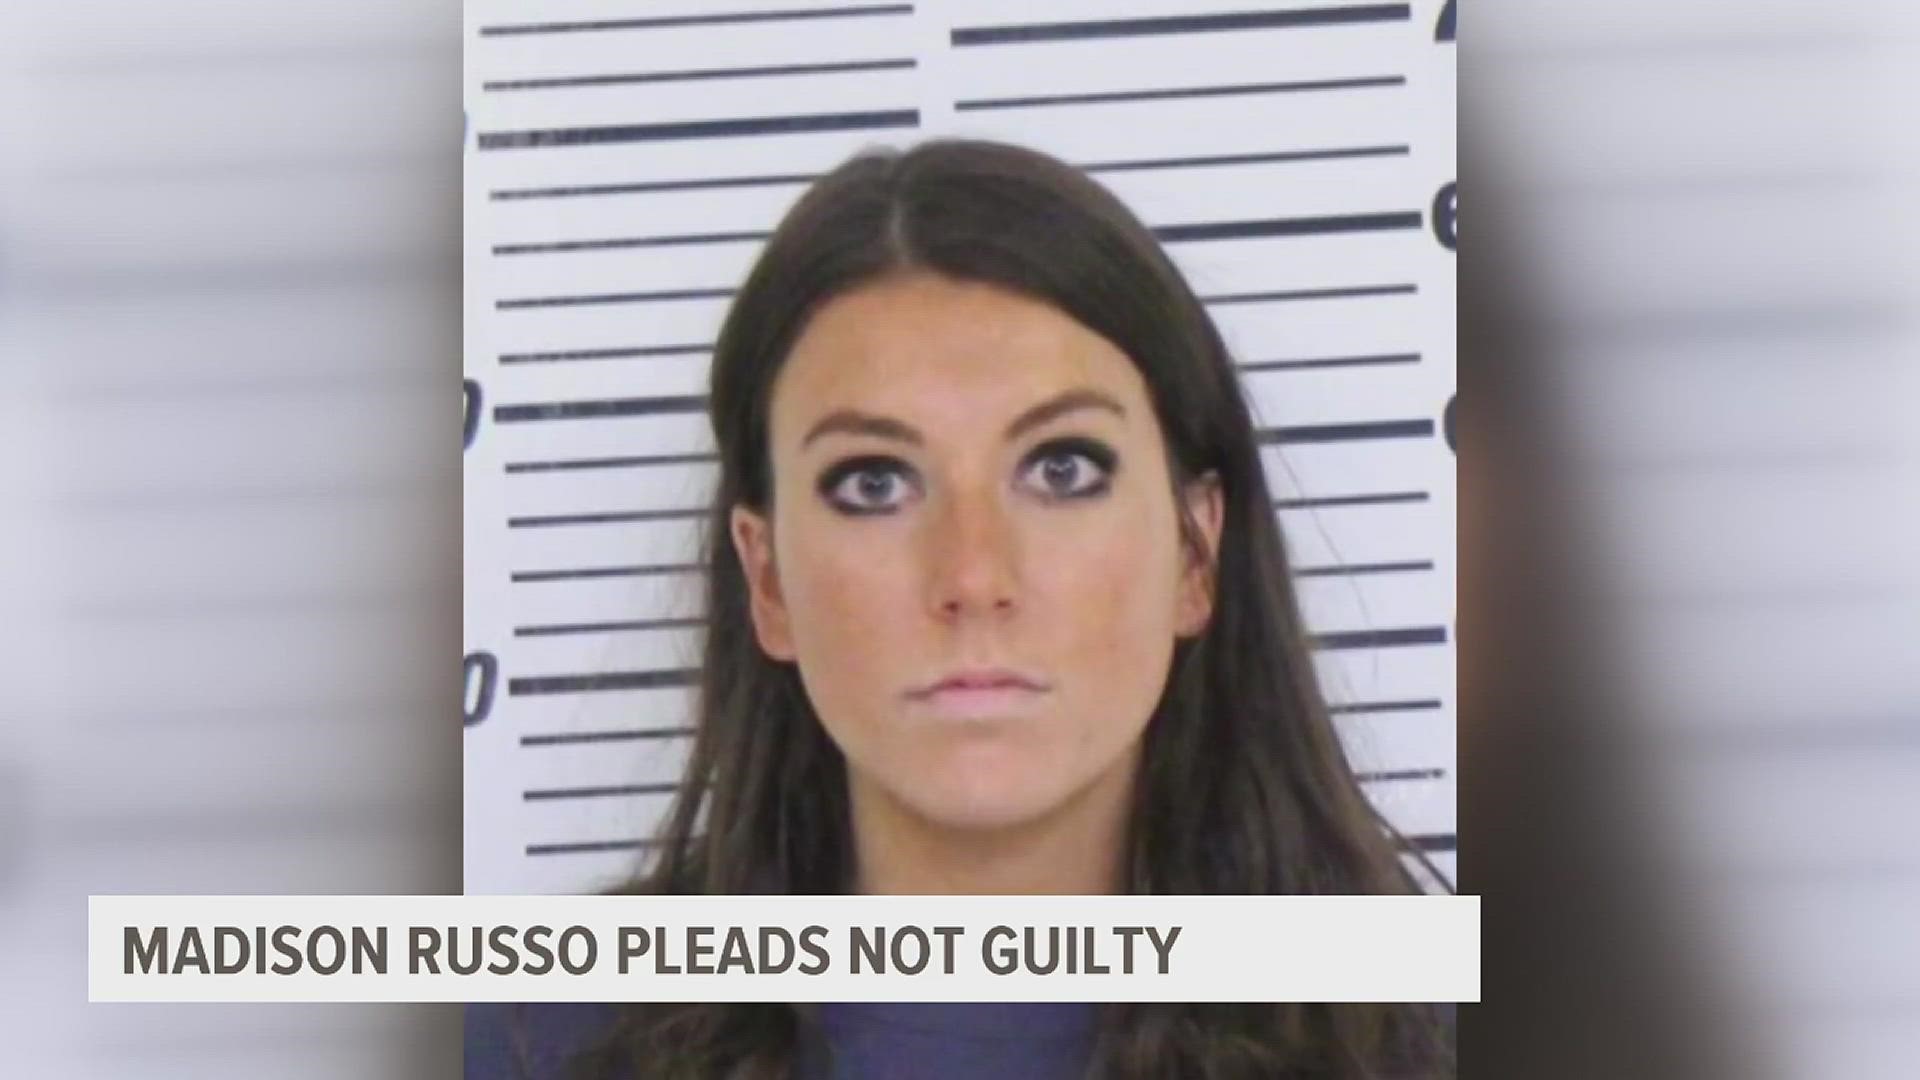 Russo waived her right to a speedy trial and pled not guilty on Tuesday. She's set to appear in court on Thursday.